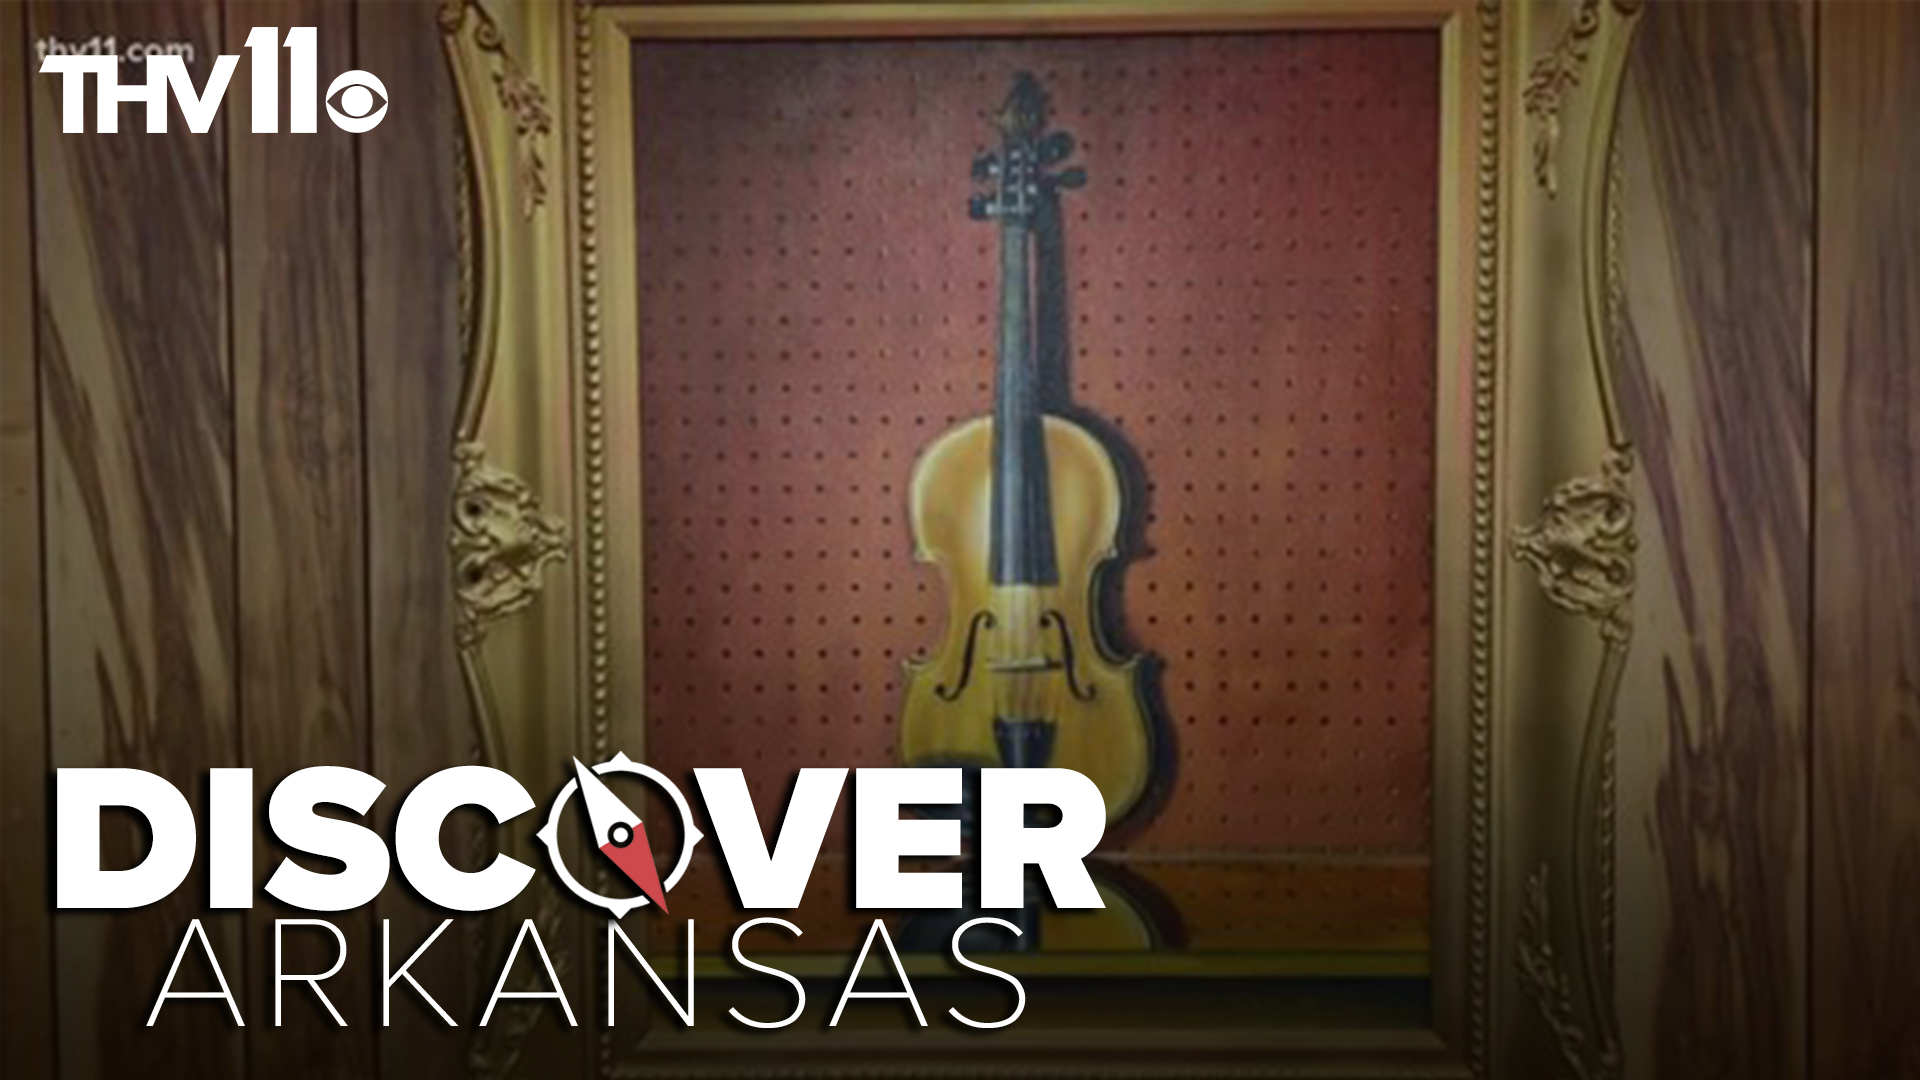 Discover Arkansas introduces you to an artist who has made a name for themselves in historic downtown Jacksonville -- RB McGrath!